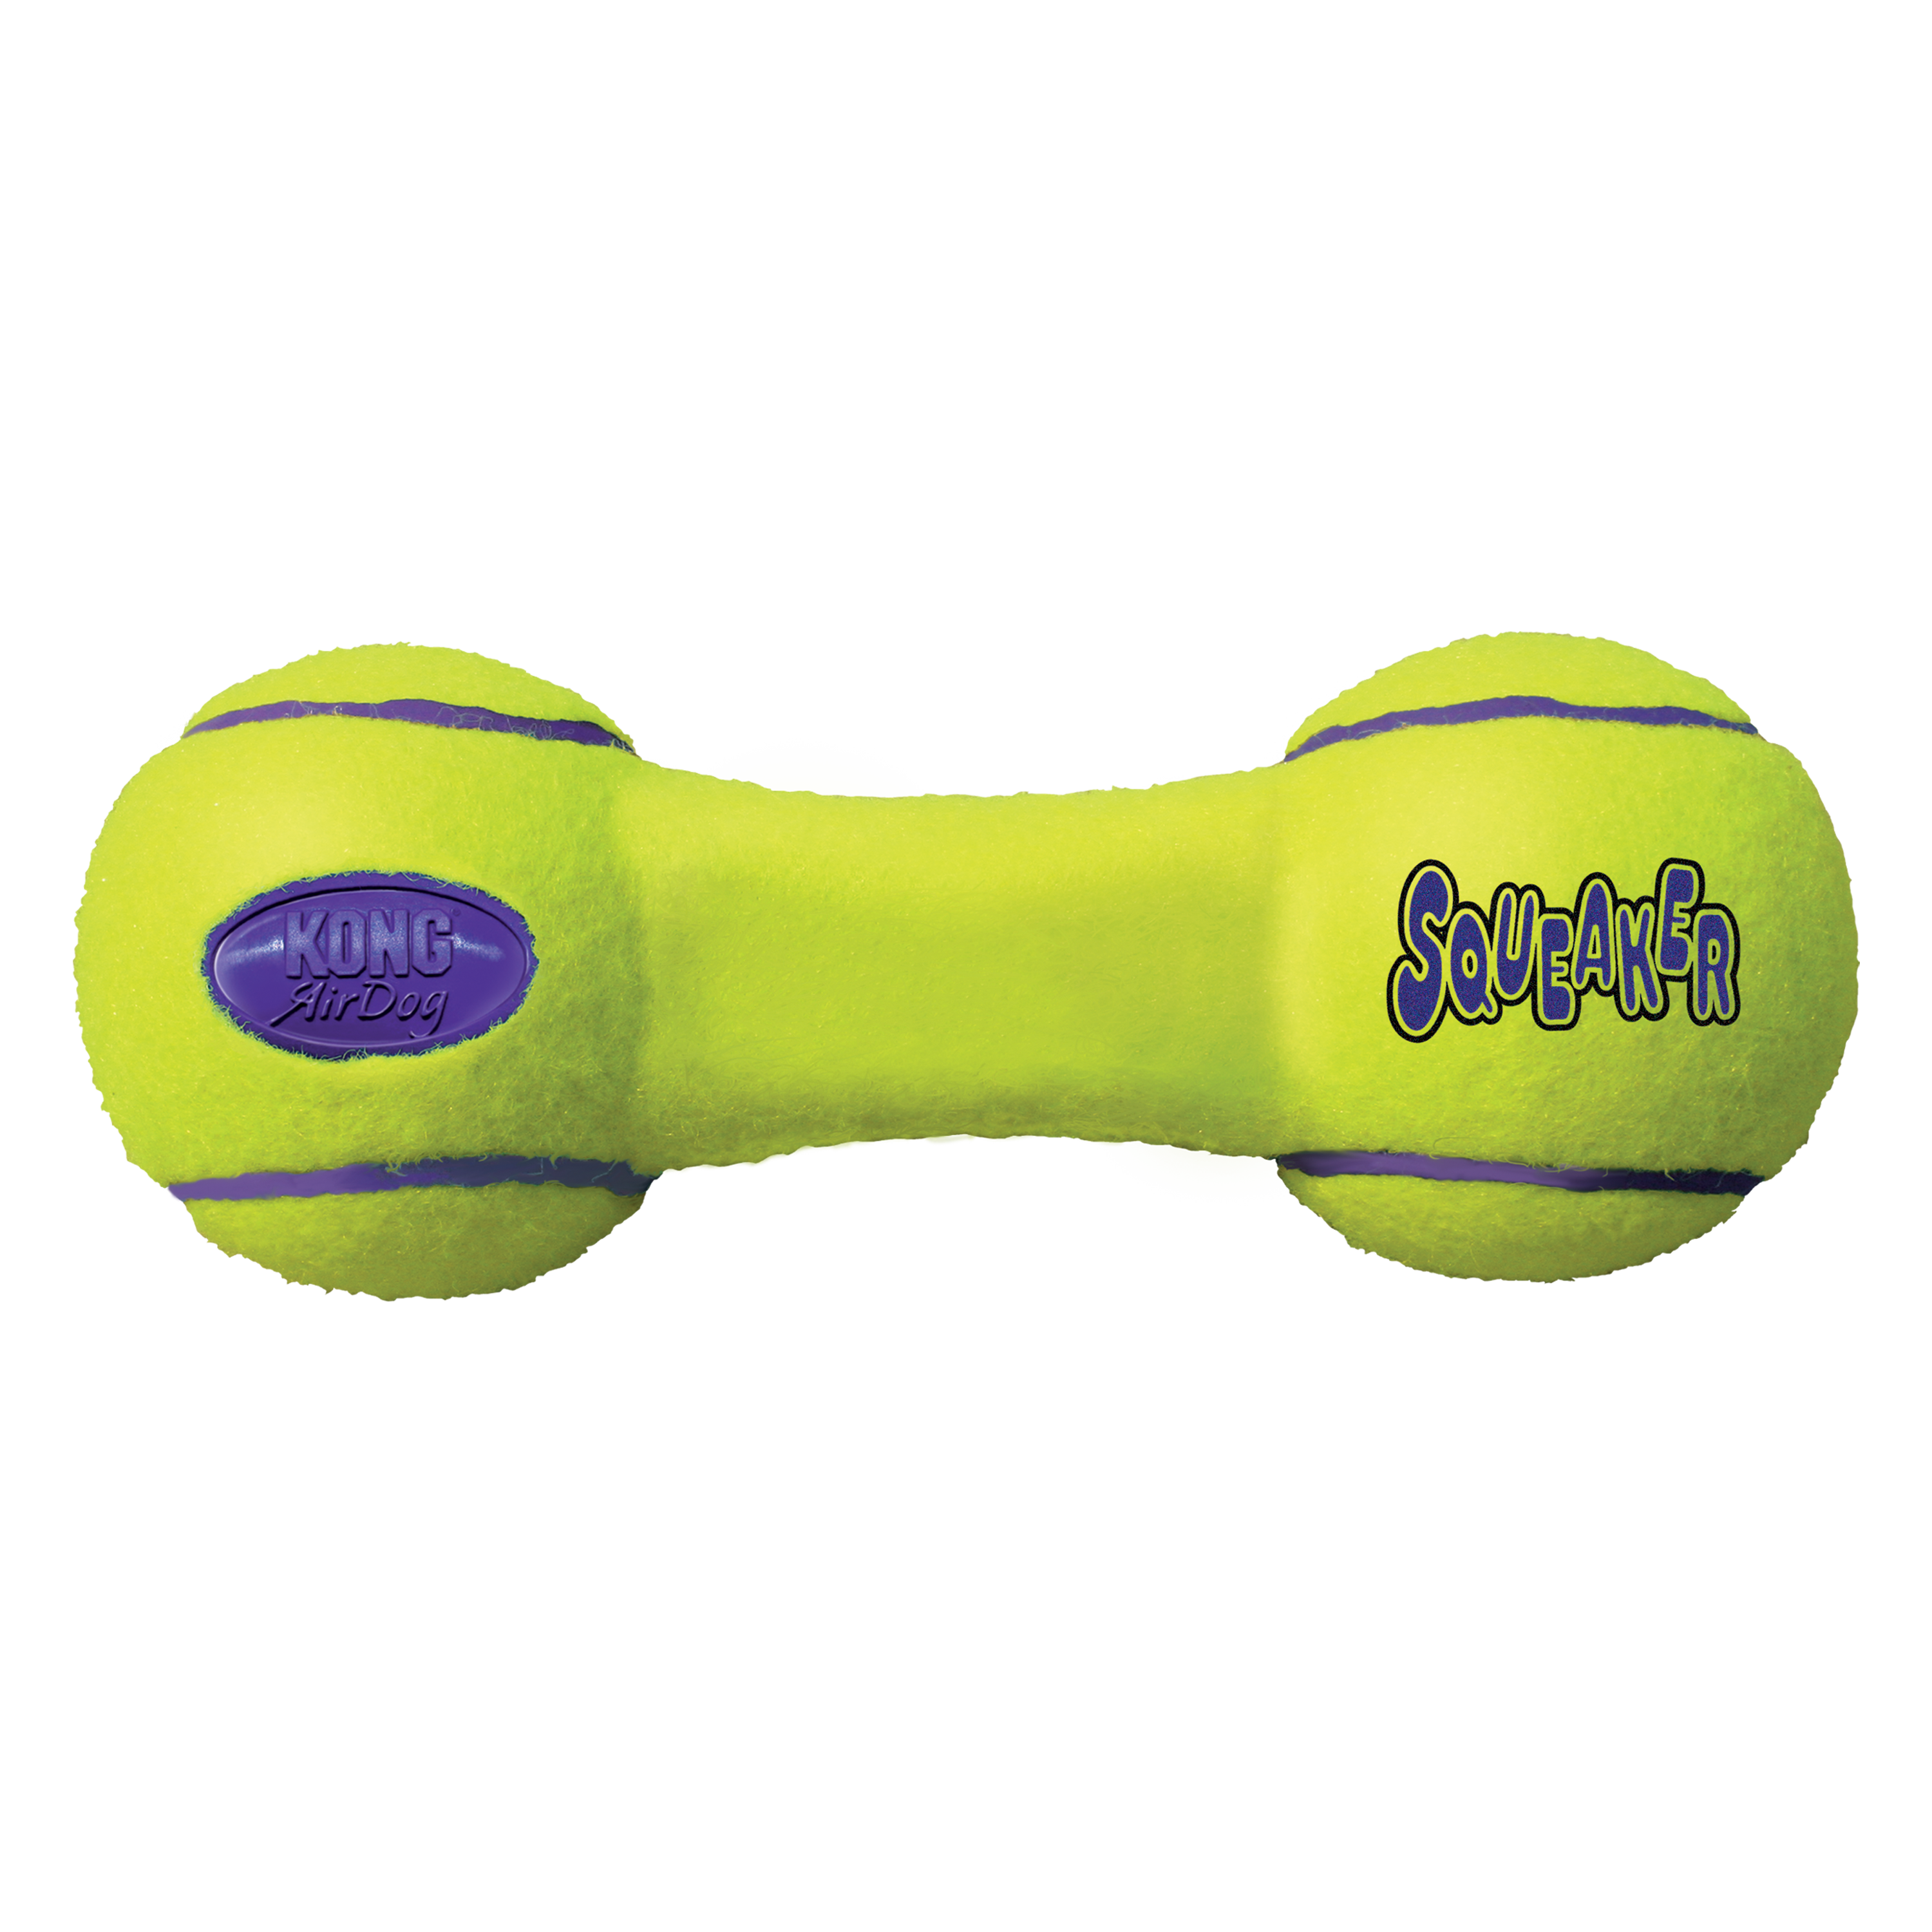 AirDog Squeaker Dumbbell offpack product image